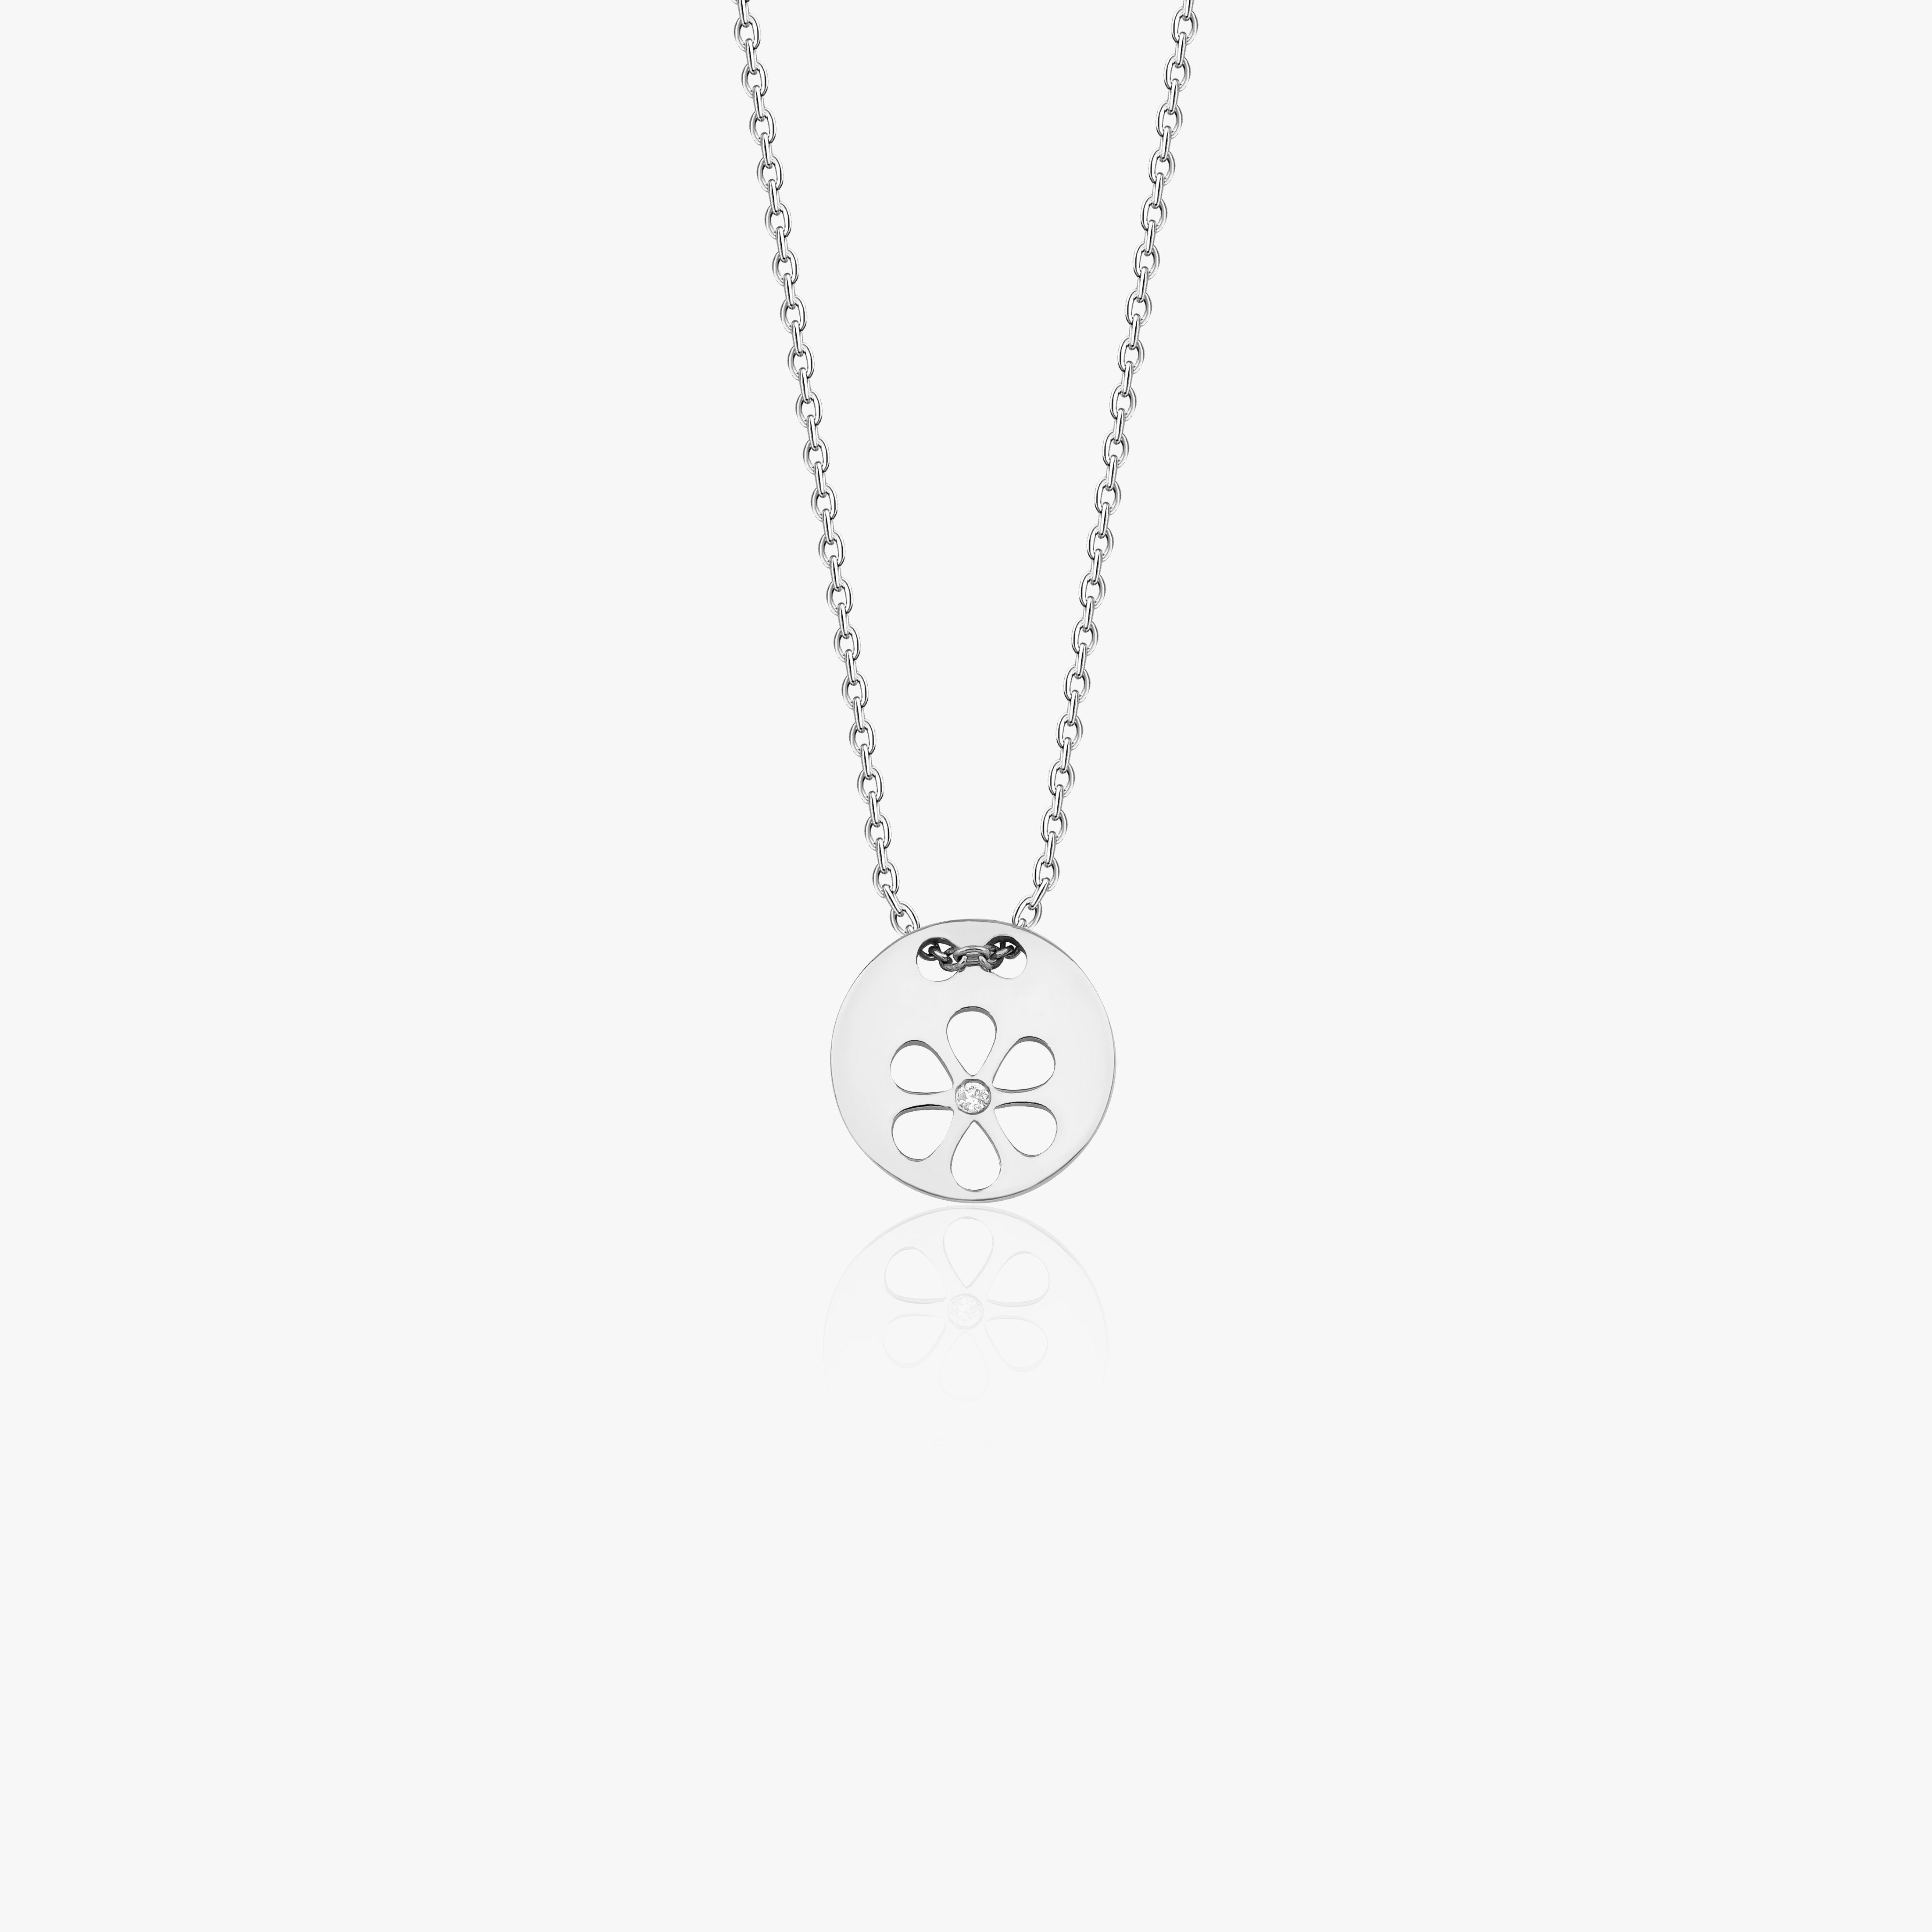 Dainty Diamond Daisy Necklace Available in 14K and 18K Gold